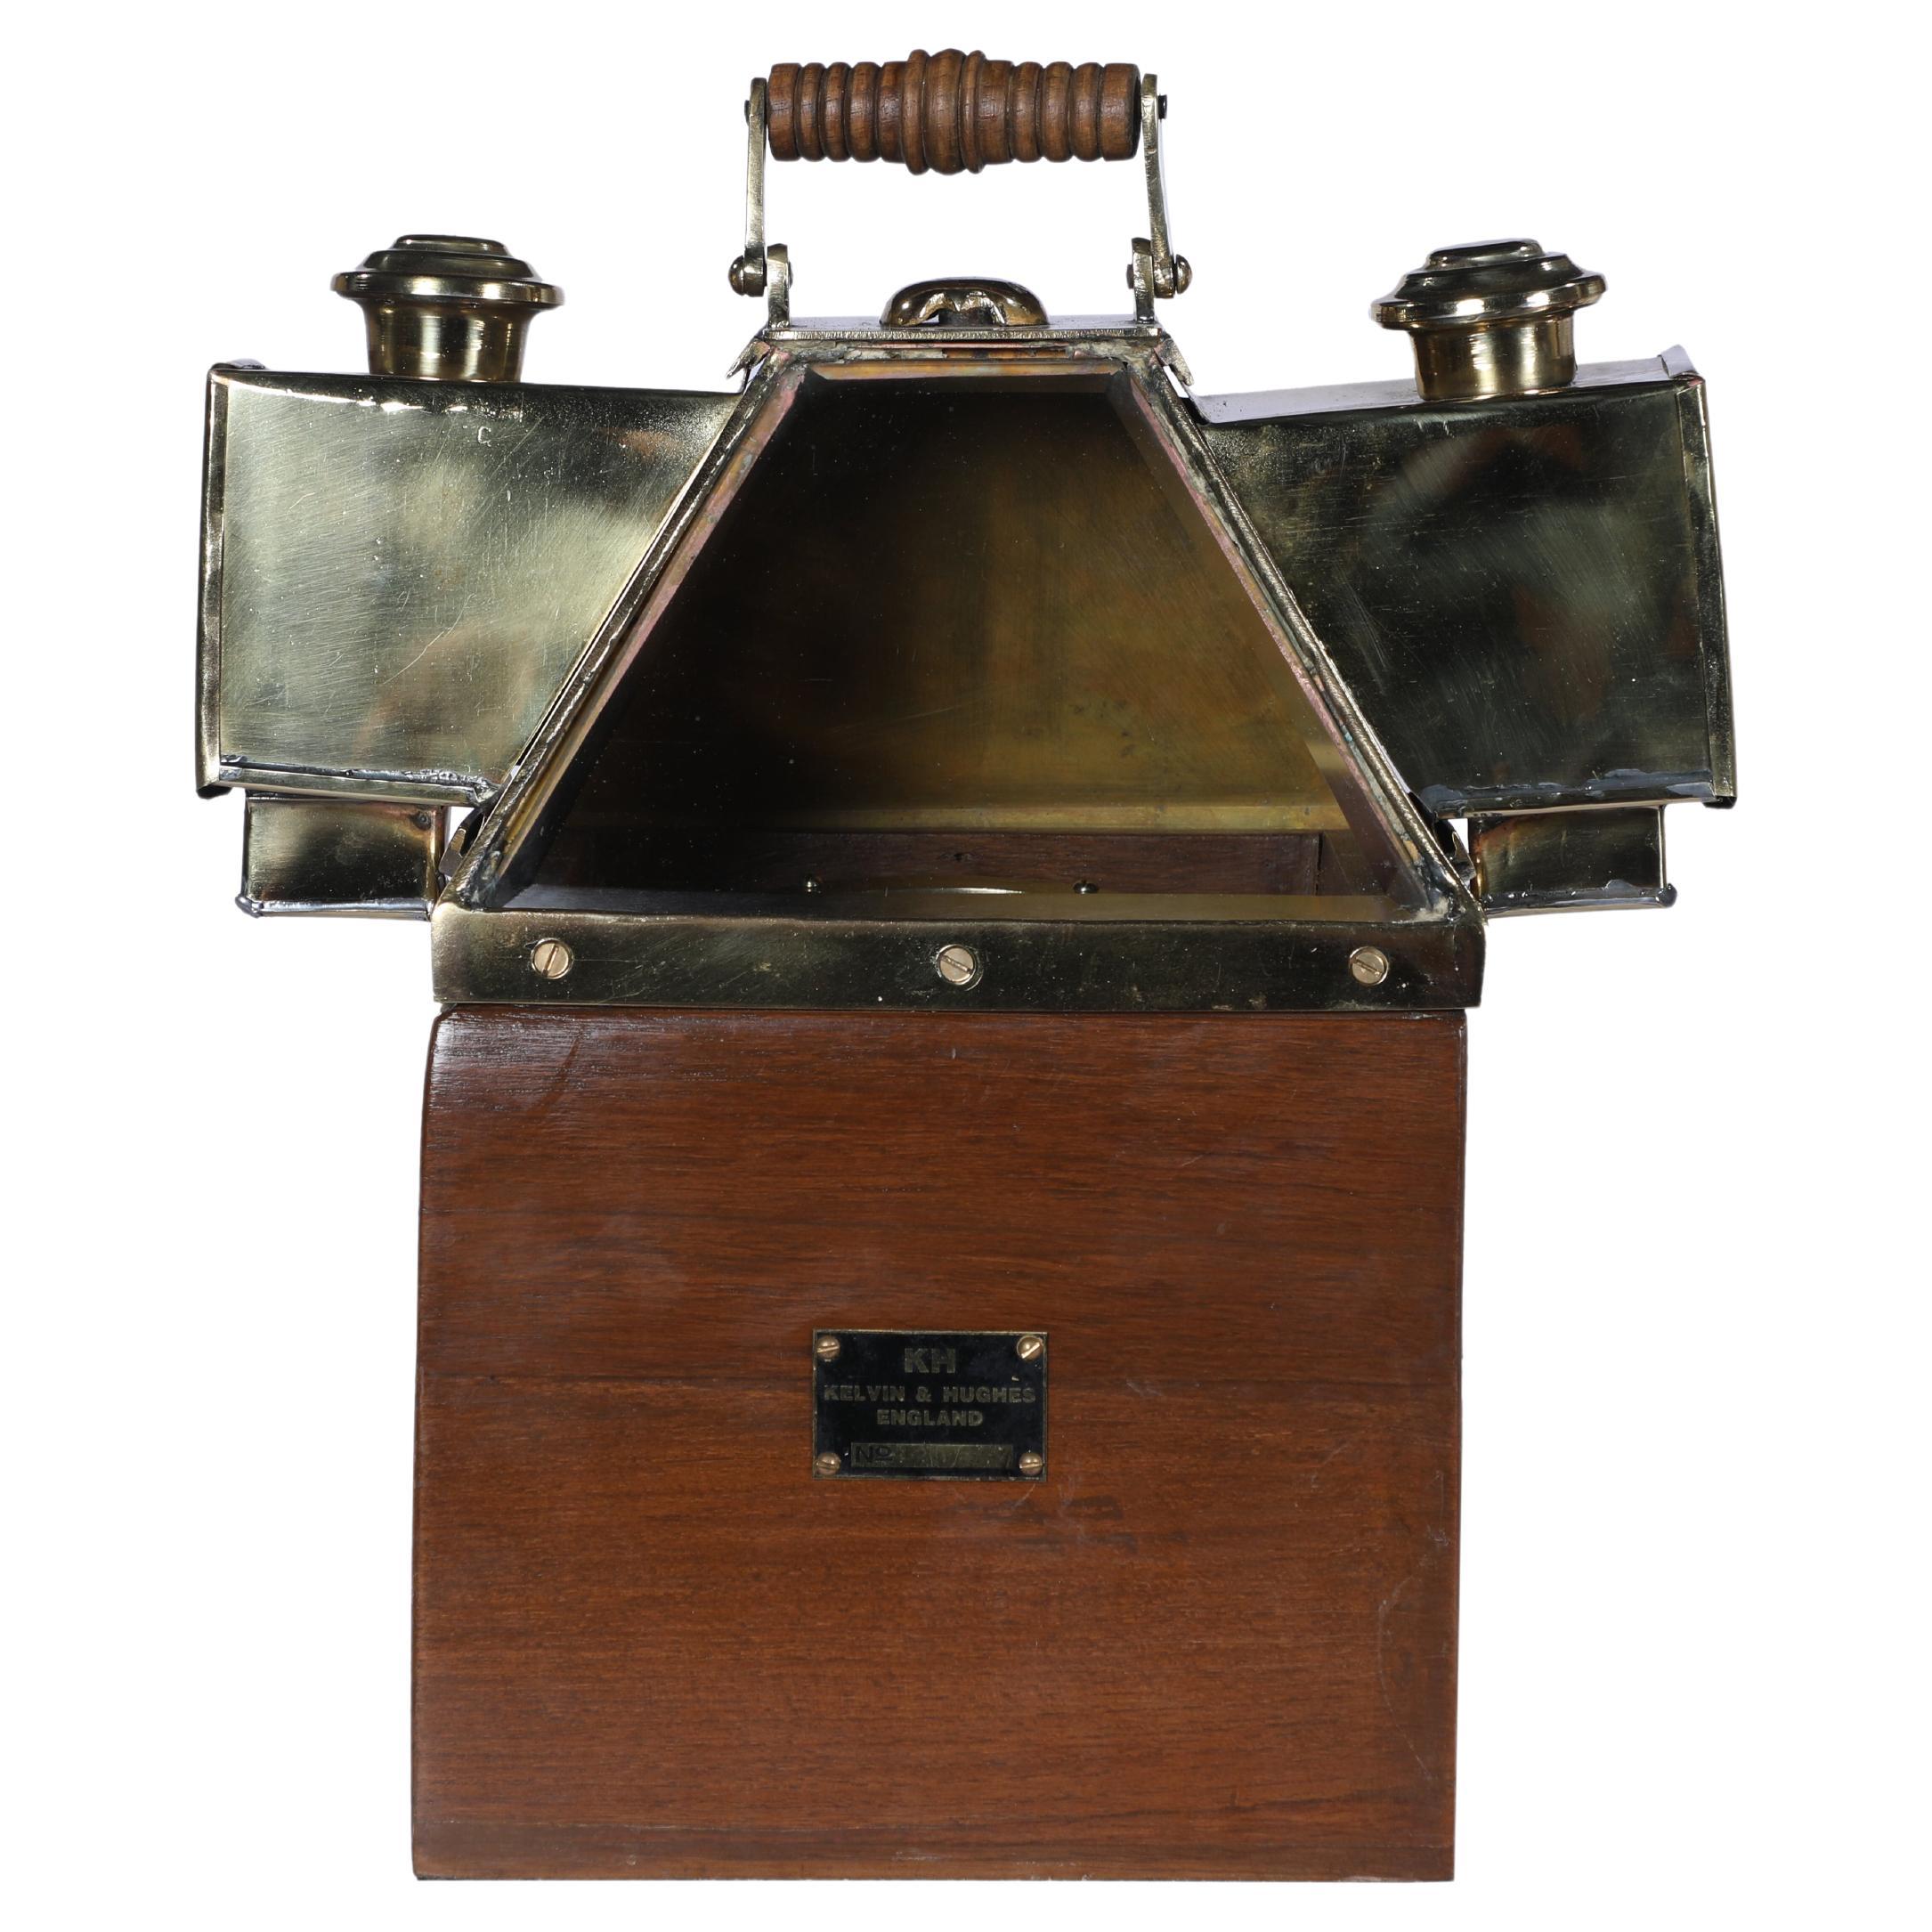 A documented Kelvin and Hughes brass binnacle compass in working order. It sits in a teak case with brass oil lights on either side. The small doors on each side open and the oil lamps slide out for lighting. Maker's plaque on the front indicating a